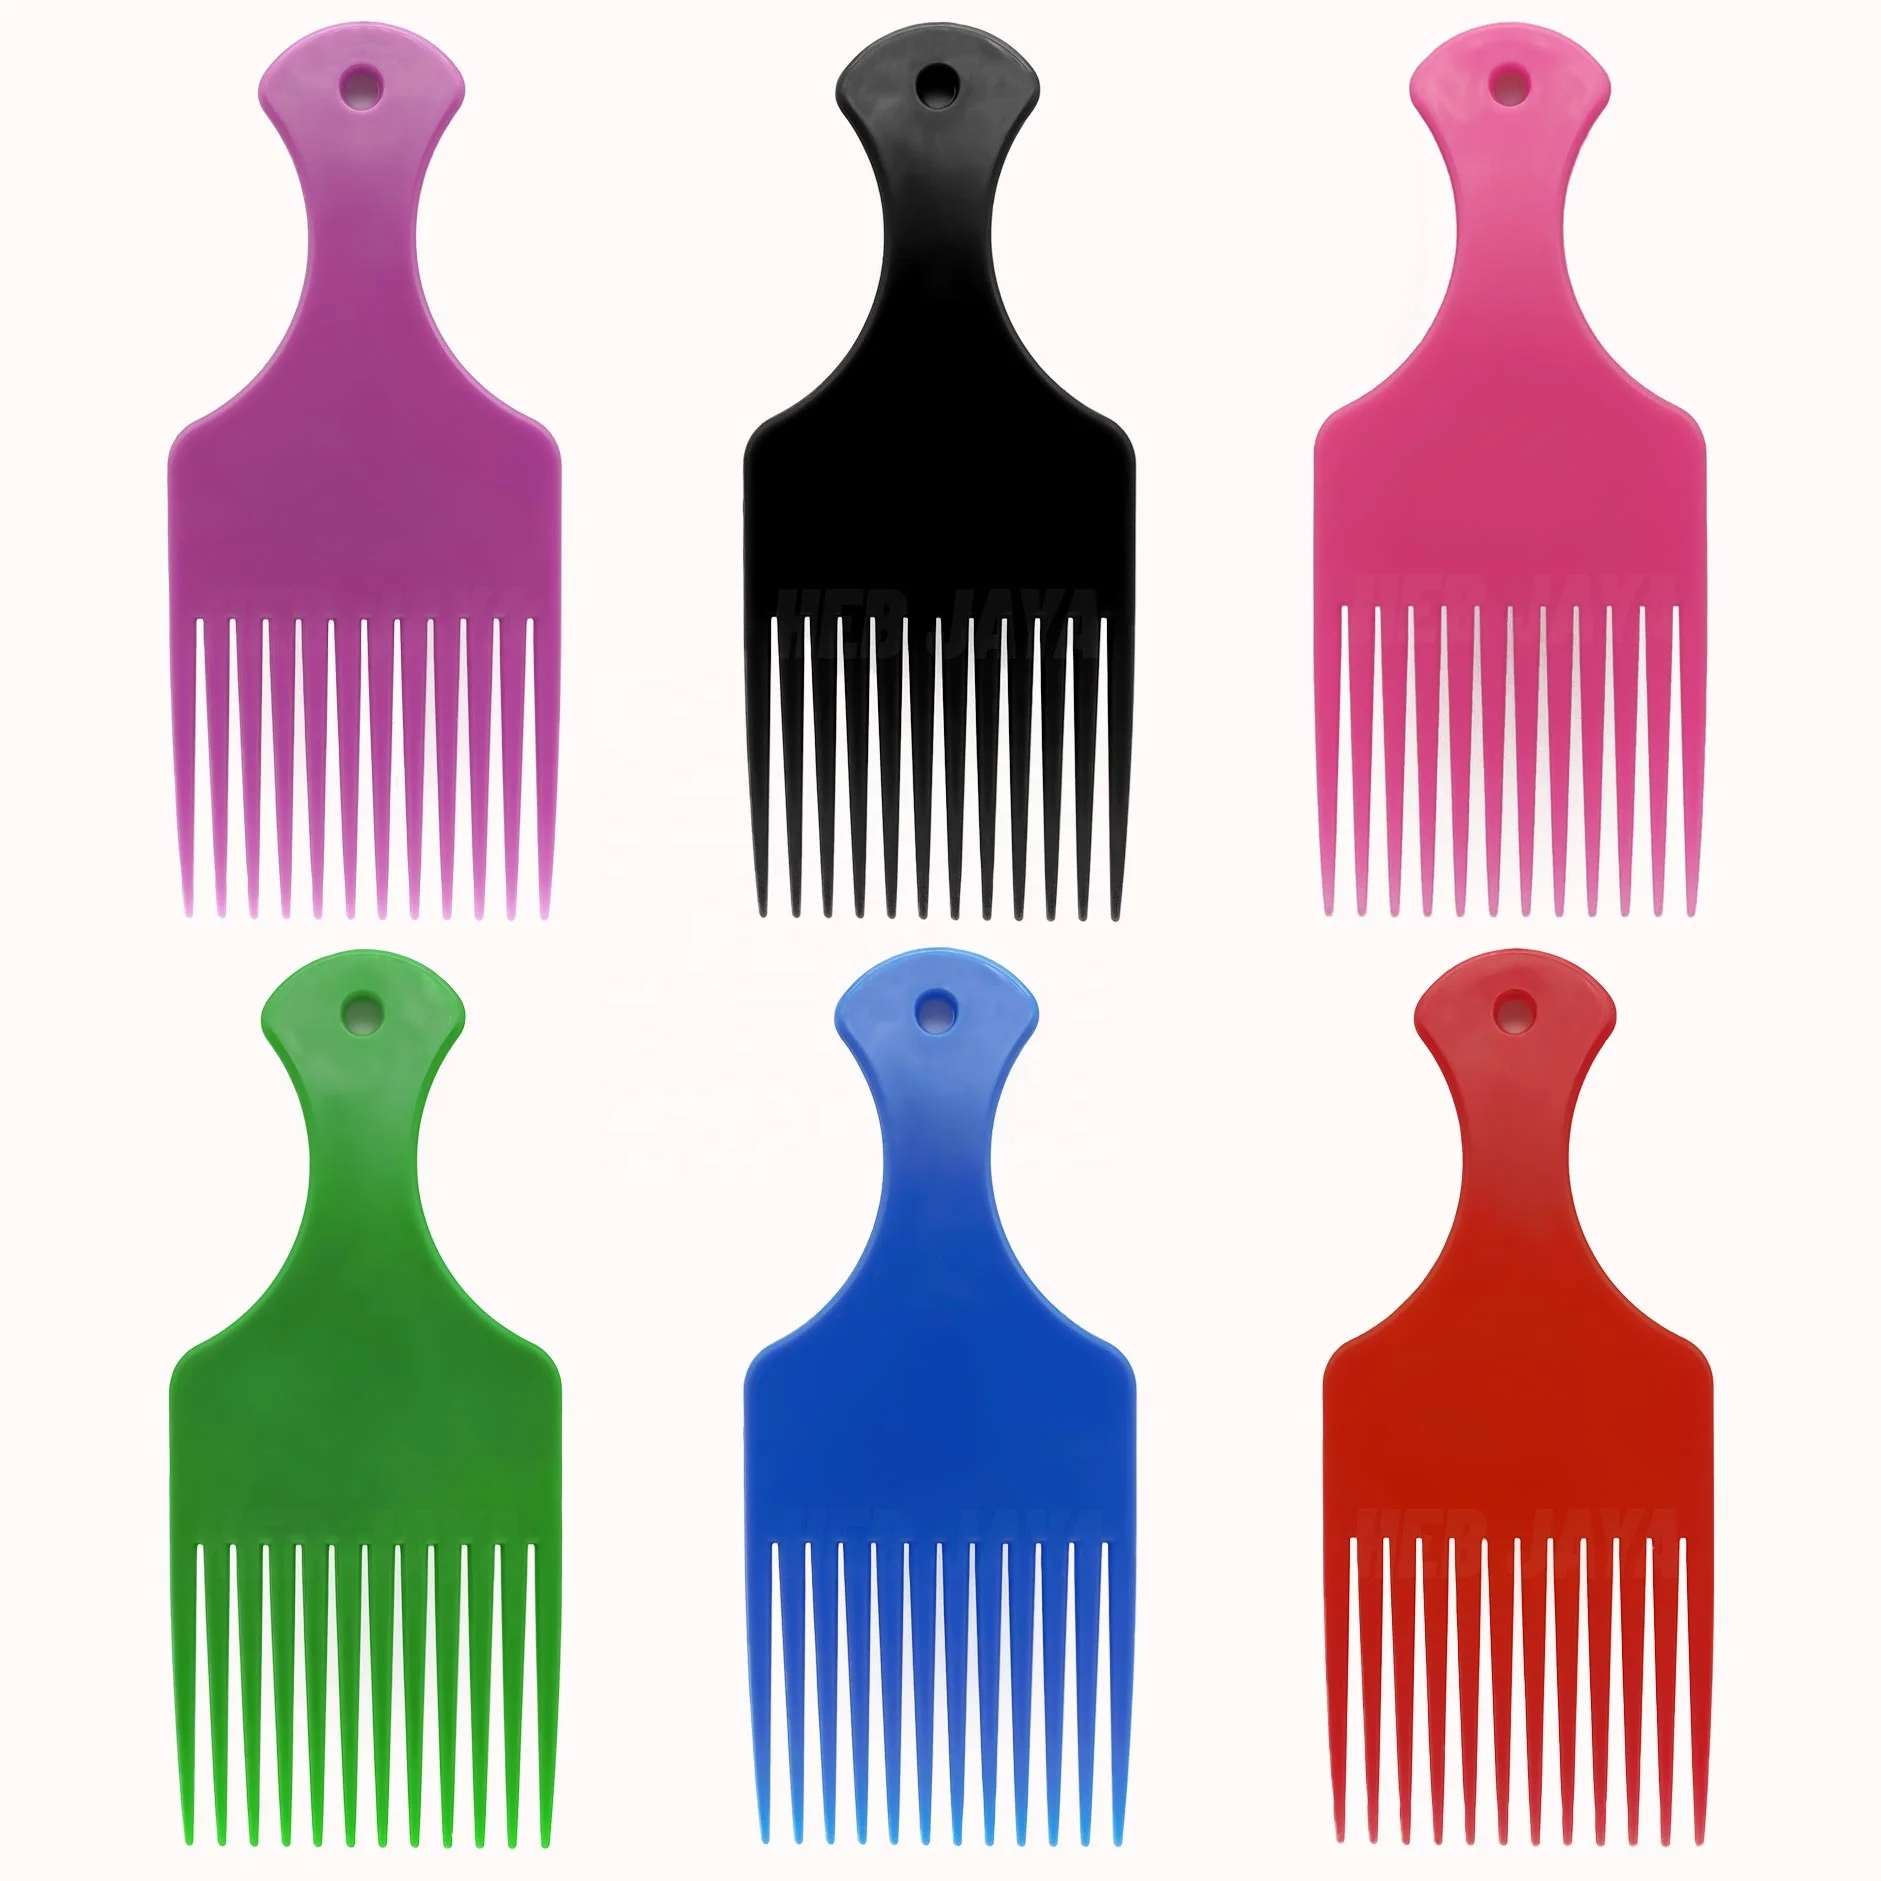 

wholesale custom plastic barber hairdressing african black mens wide tooth curly detangling afro hair pick comb set with logo, As requested